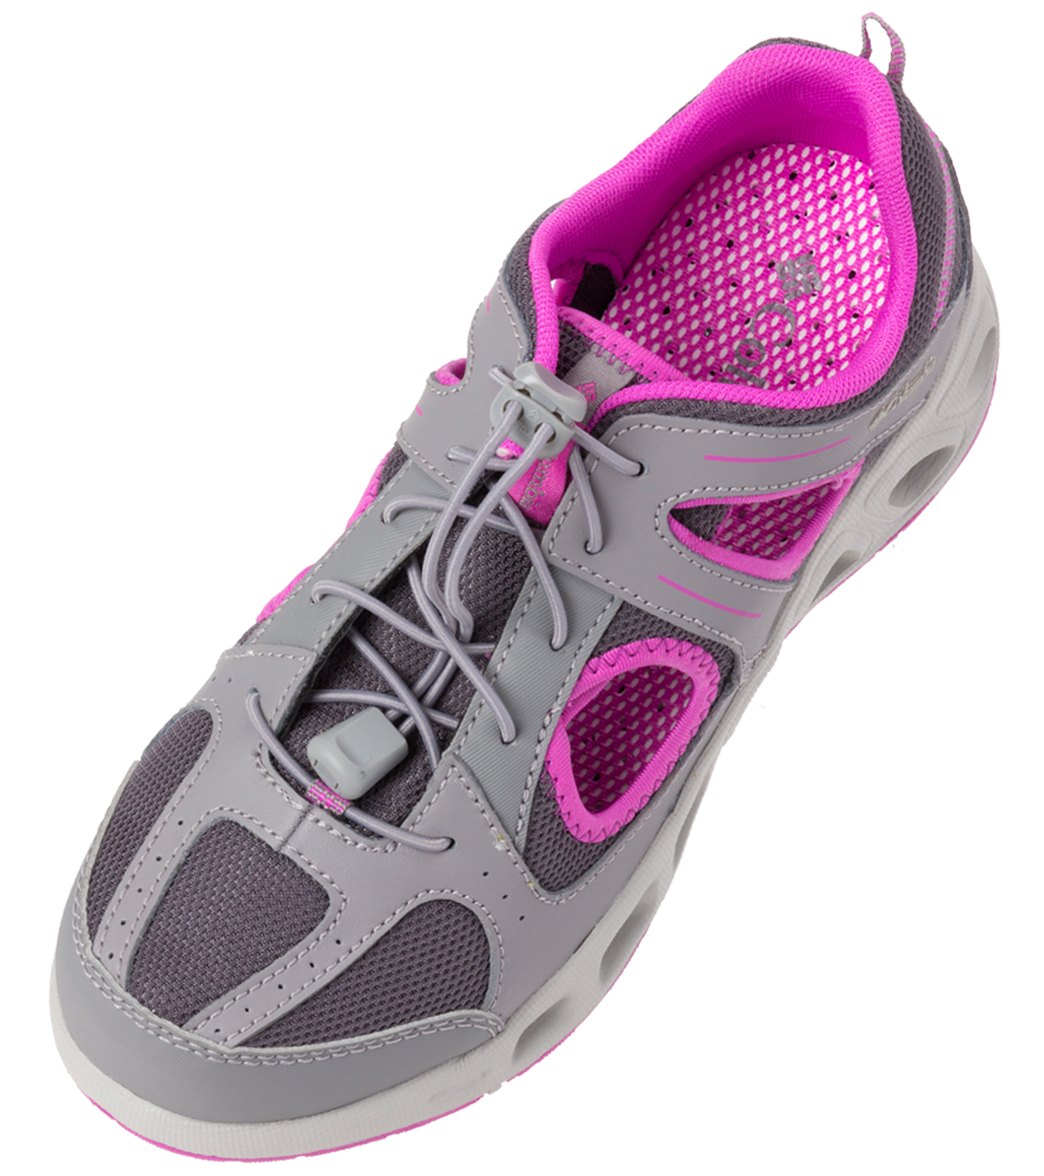 Columbia Youth Supervent Water Shoe - Shale/Foxglove 6 Leather/Rubber - Swimoutlet.com